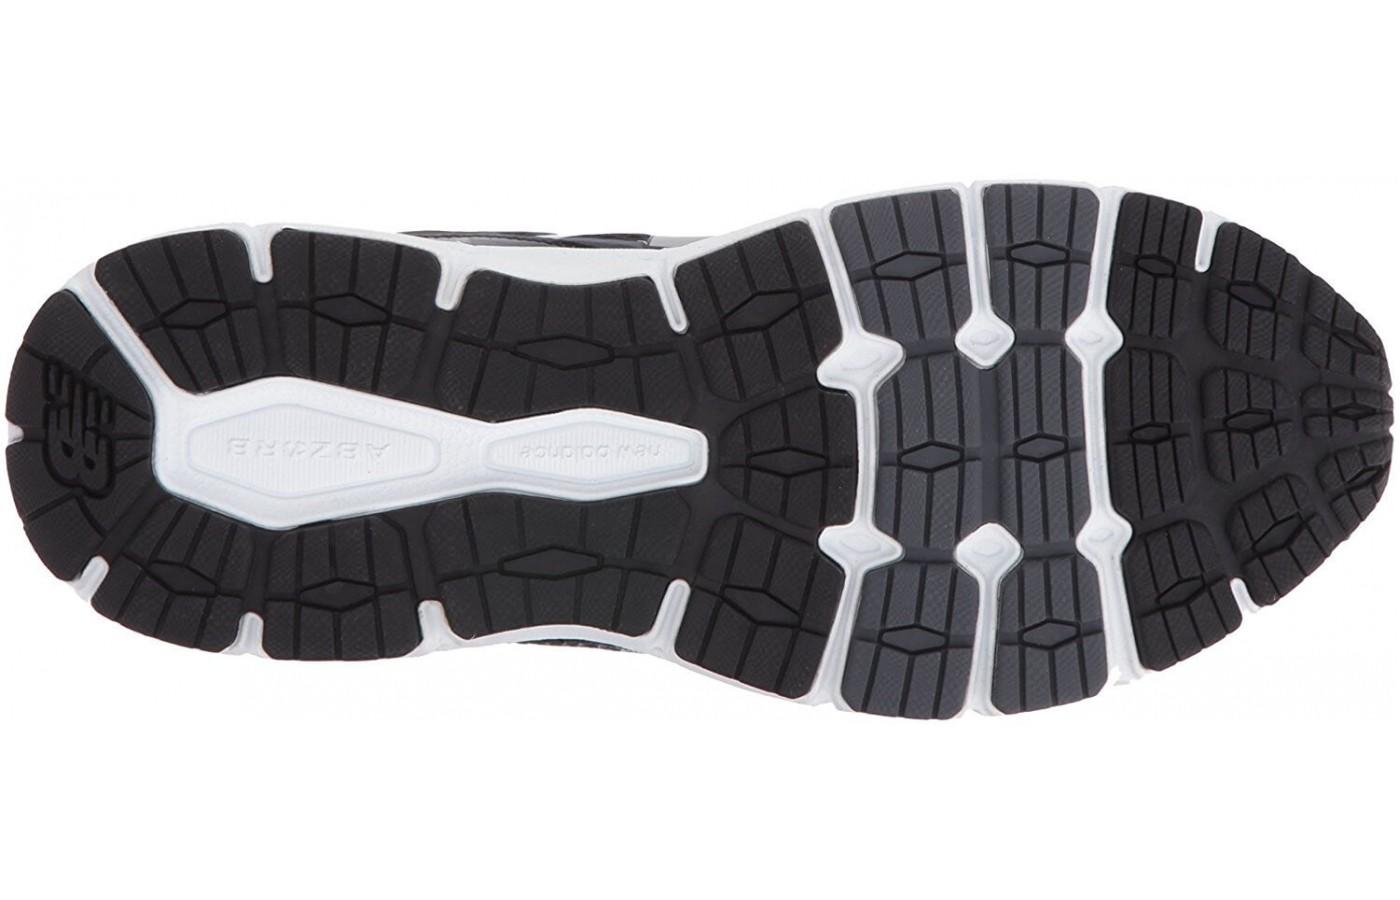 The rubber outsole provides decent traction on roads and light trails